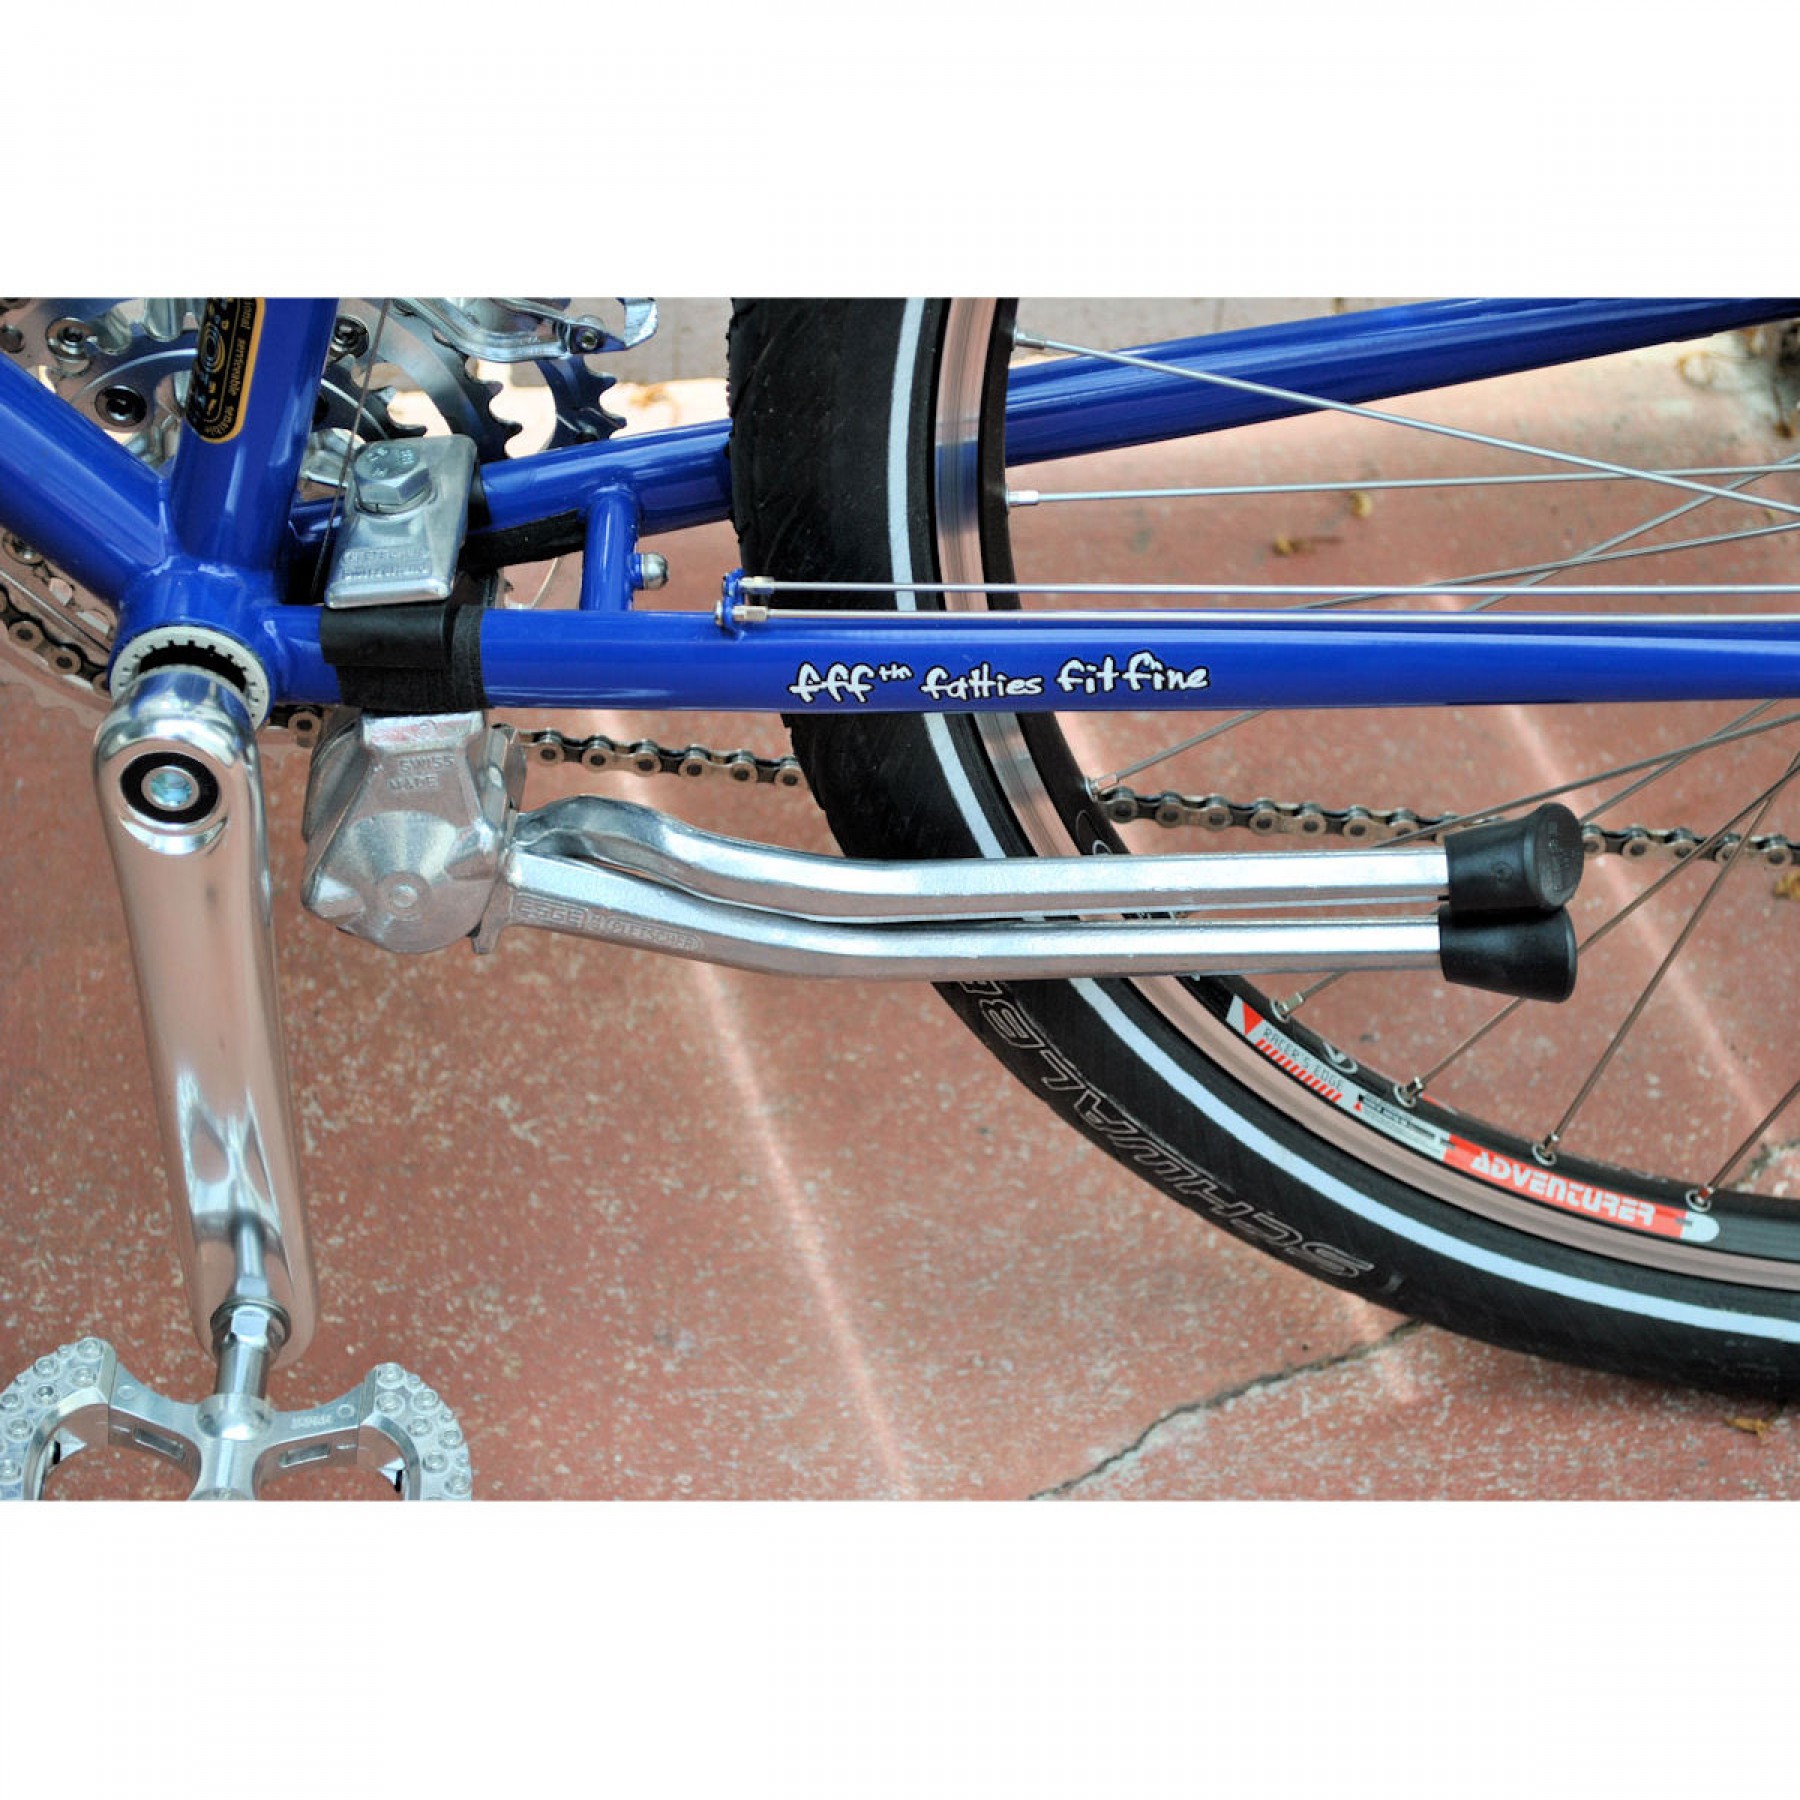 The Pletscher twin centre bicycle stand 